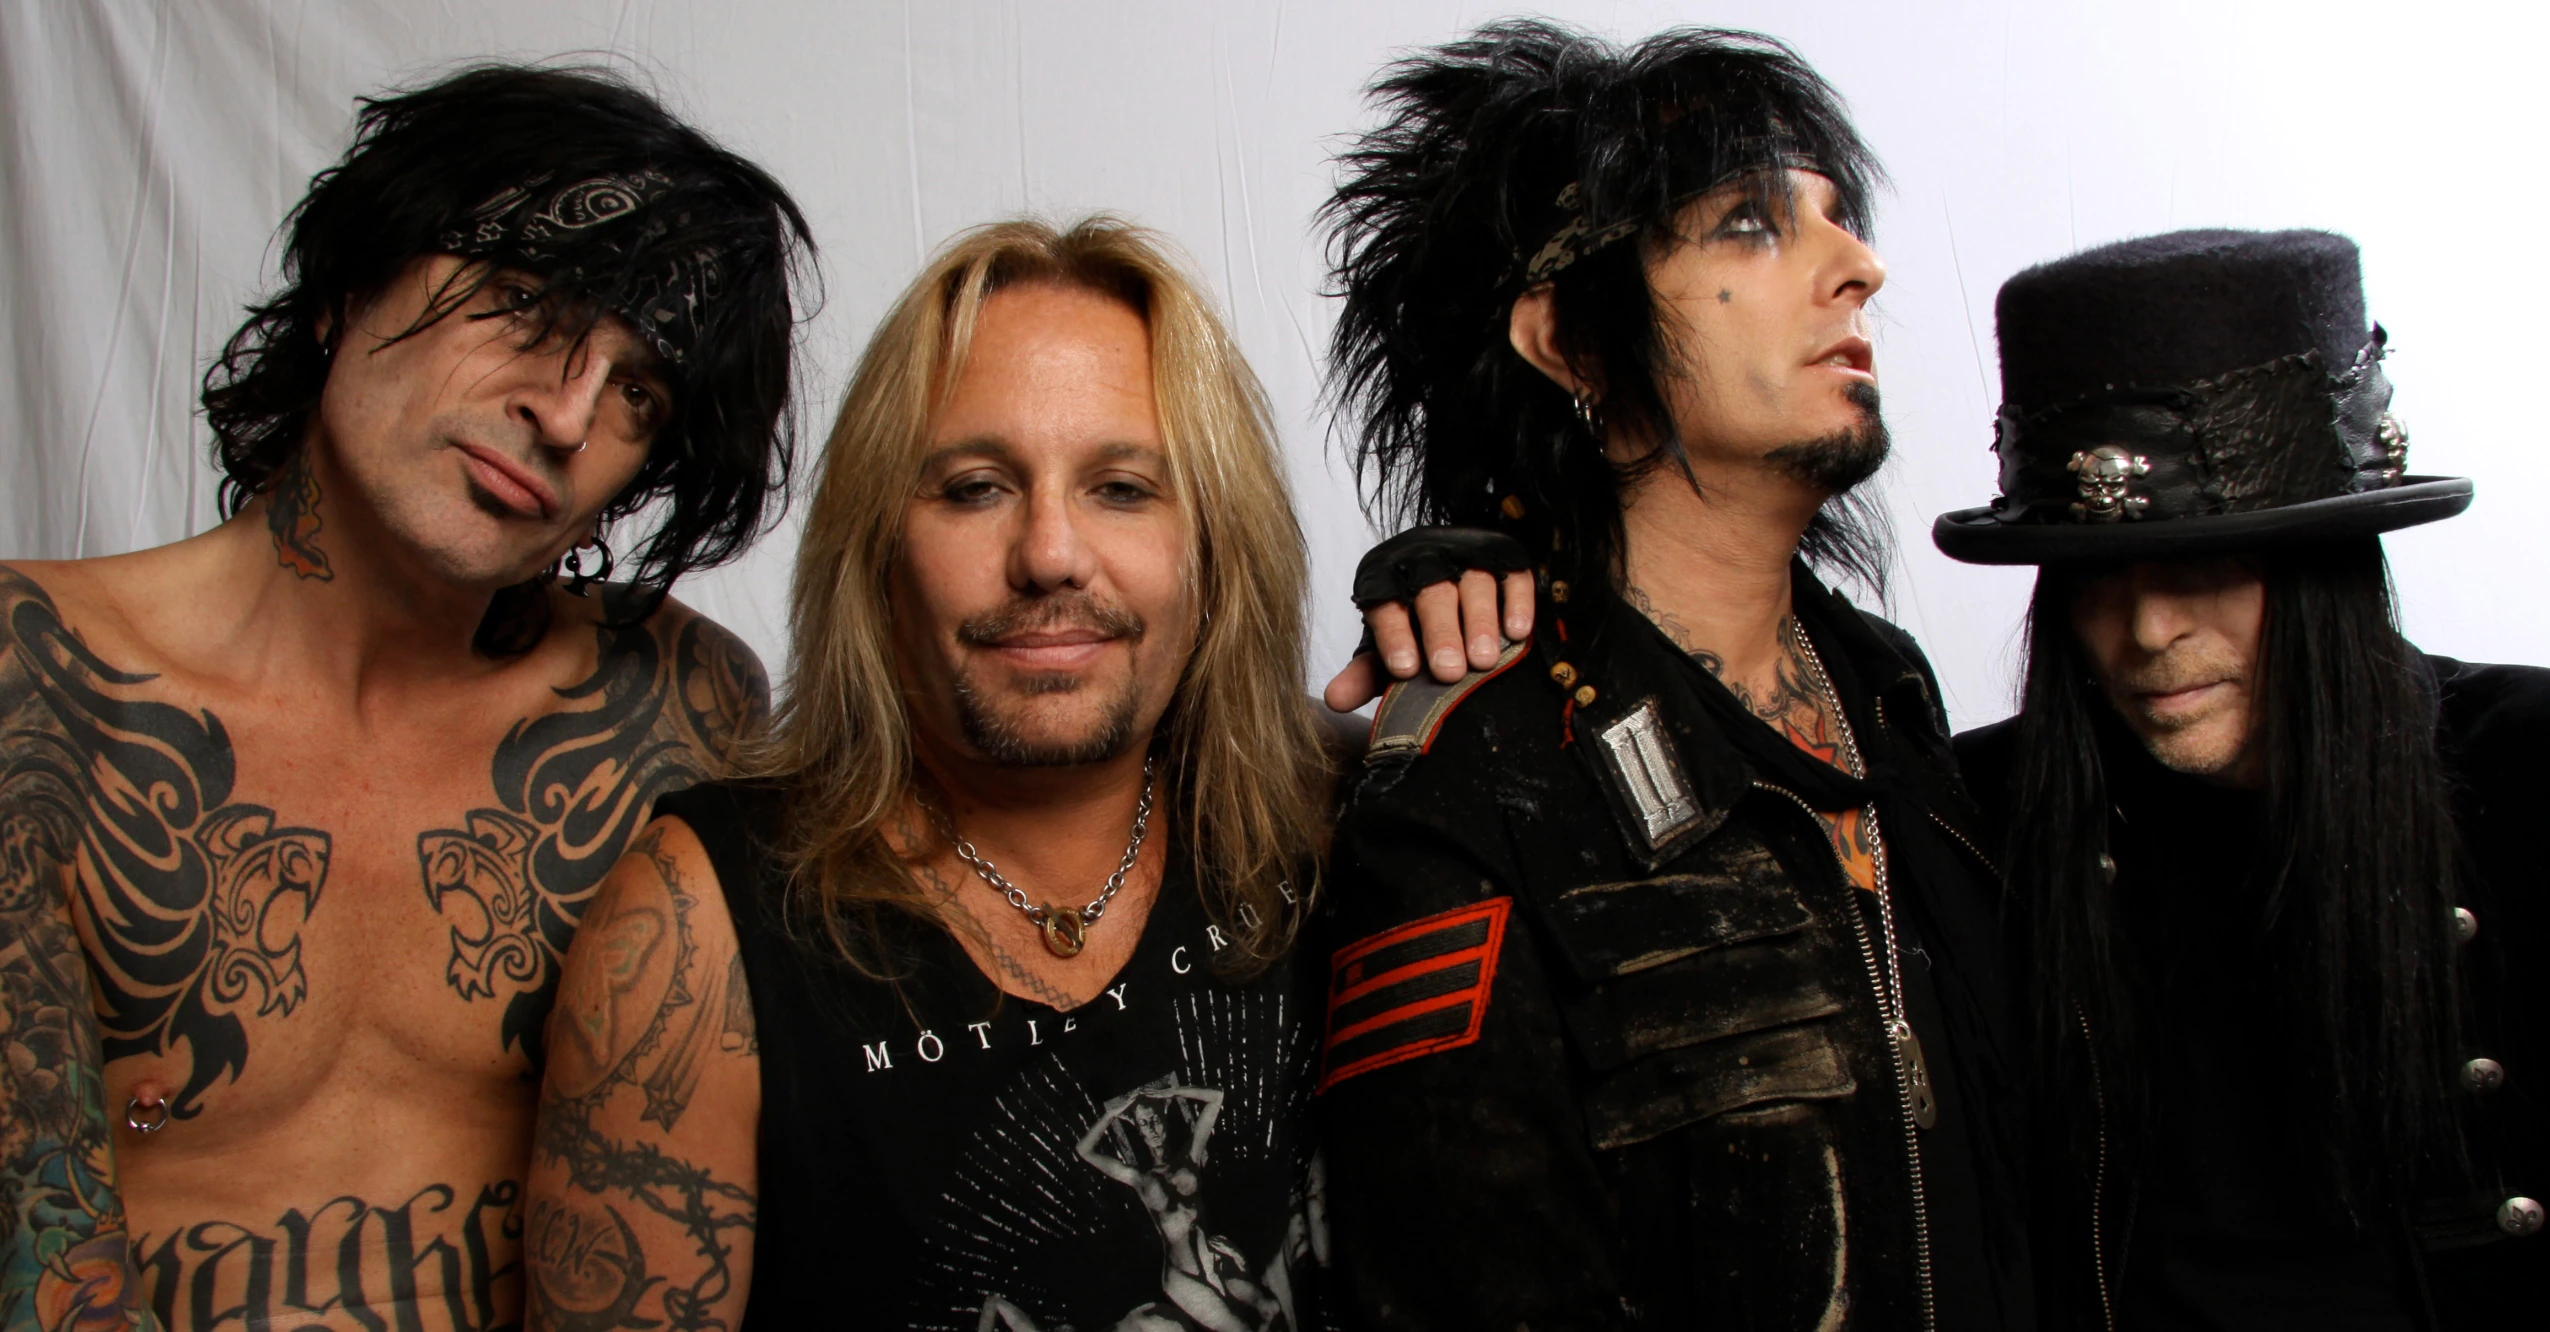 Mötley Crüe Sells Entire Music Catalog for $150 Million to BMG